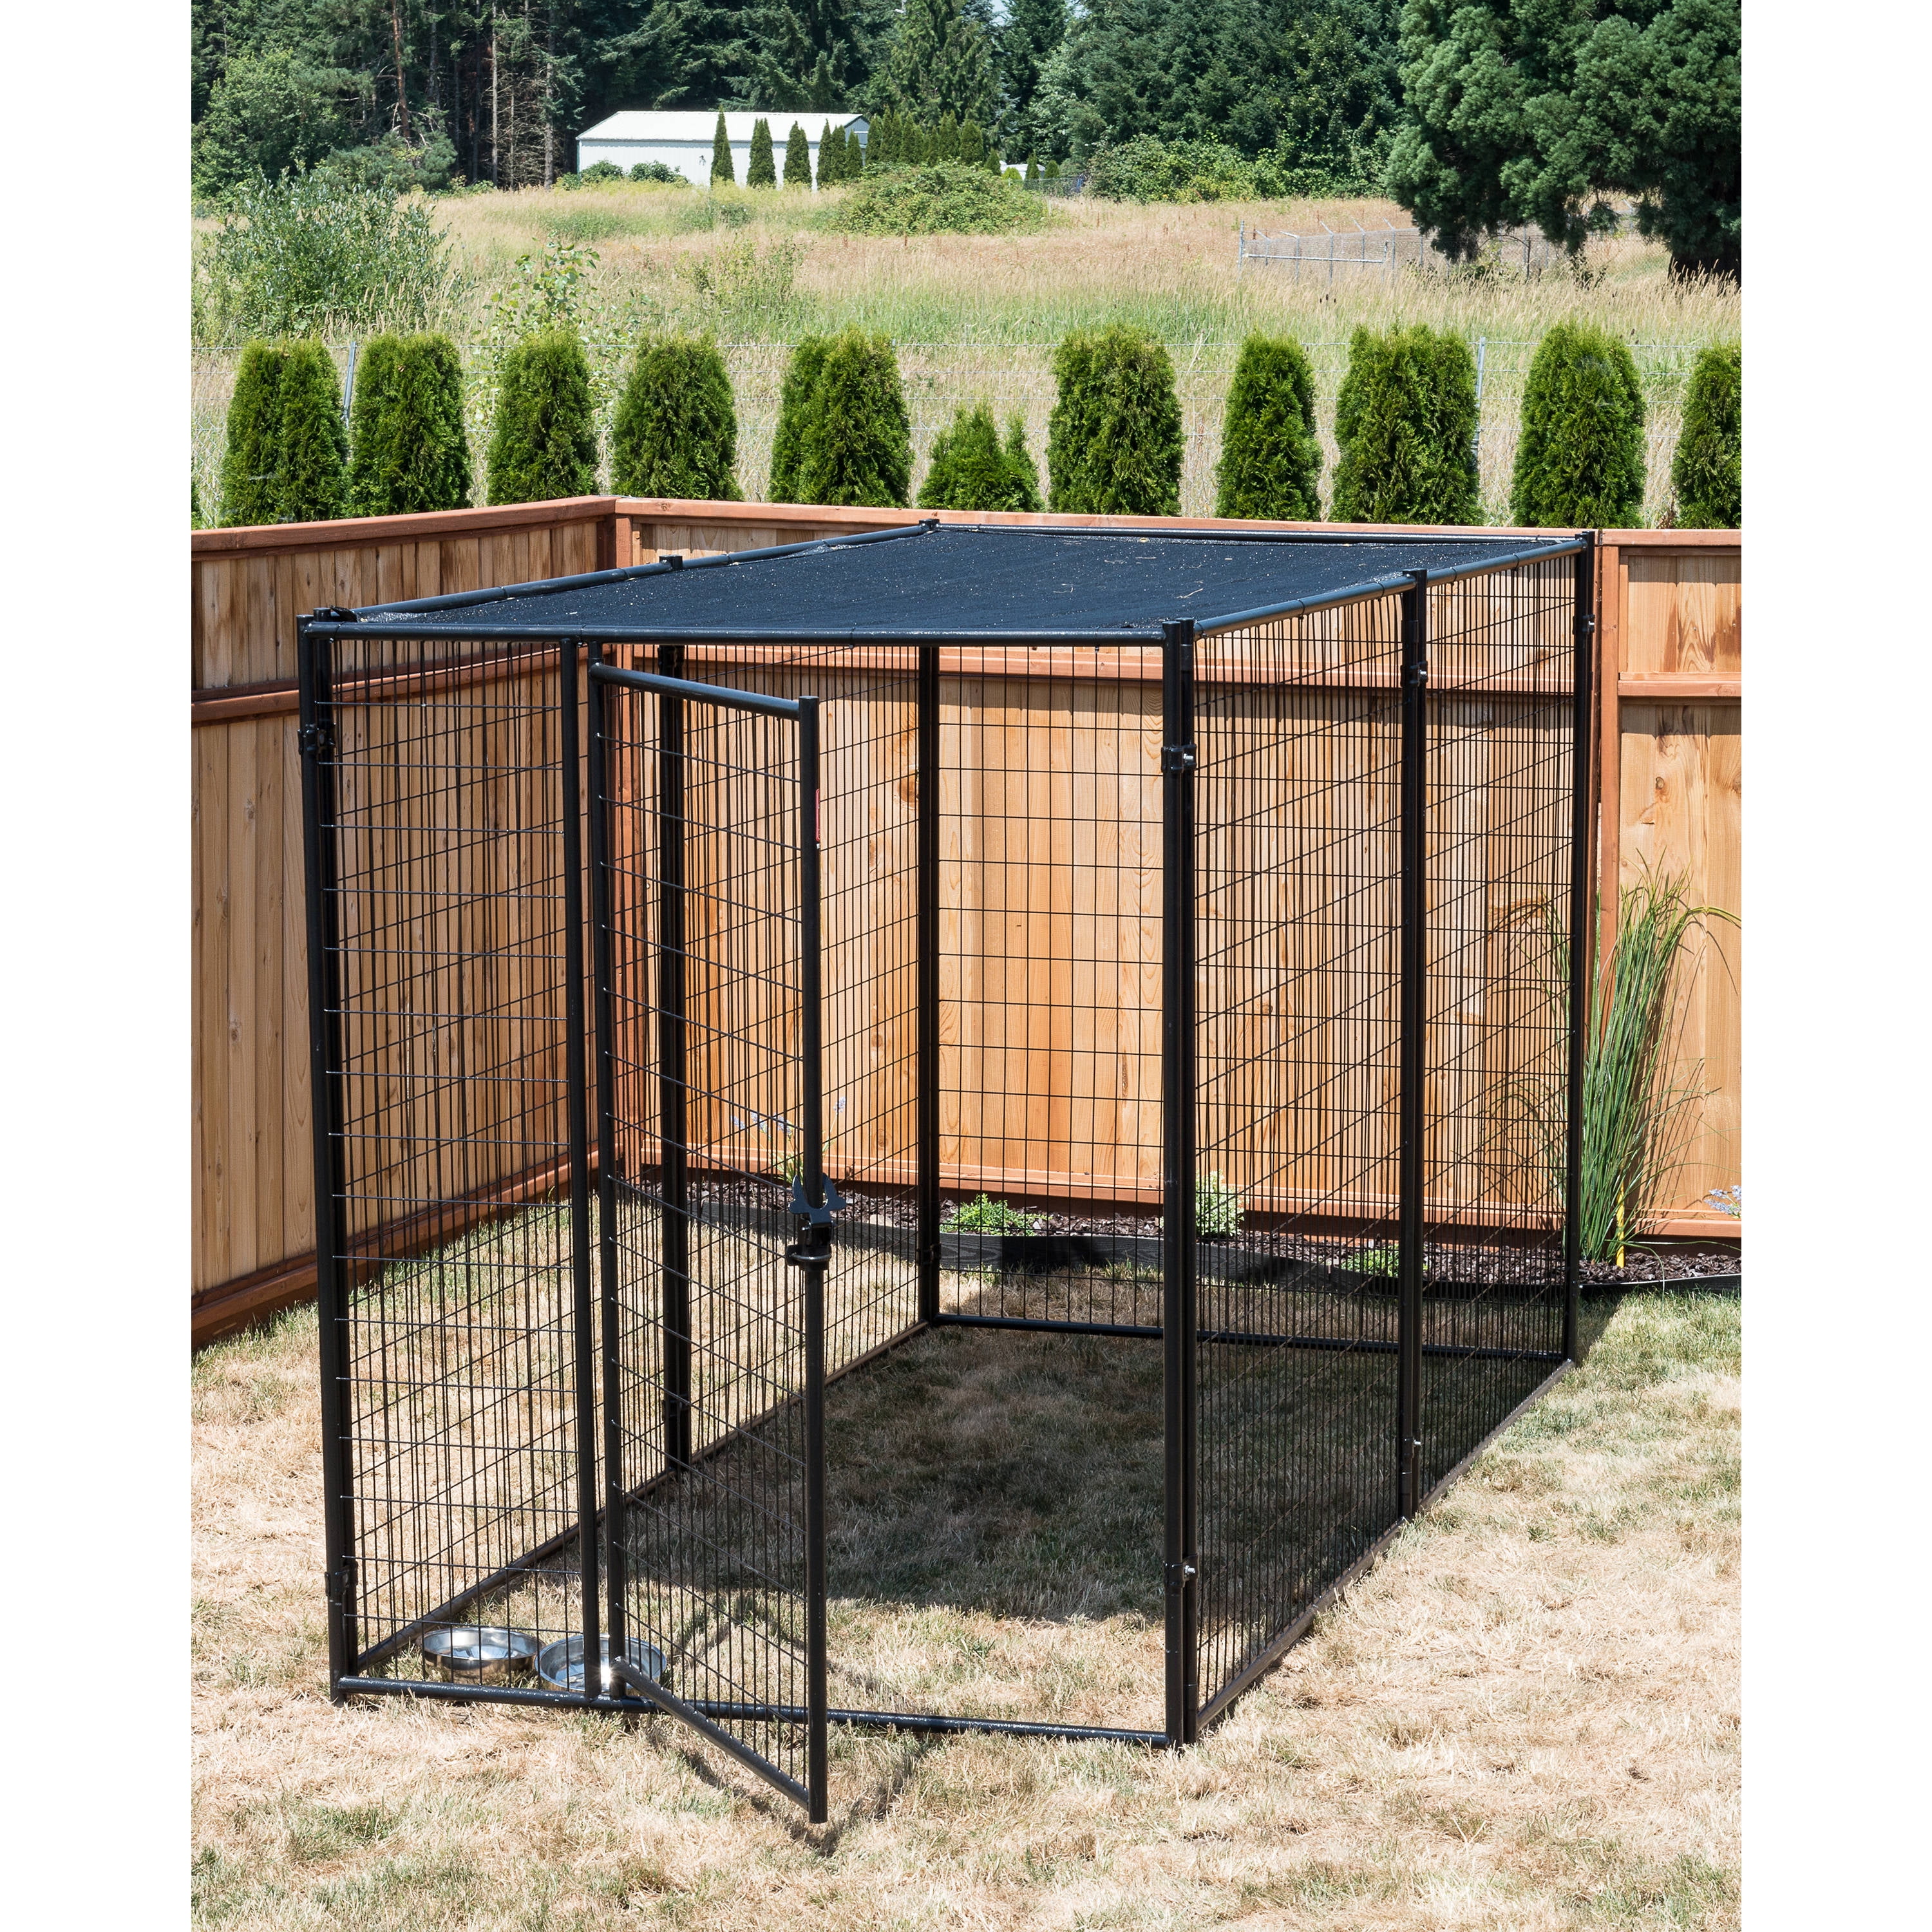 Lucky Dog Modular Outdoor Pet Kennel with Shade Cover, 10'L x 5'W x 8'H